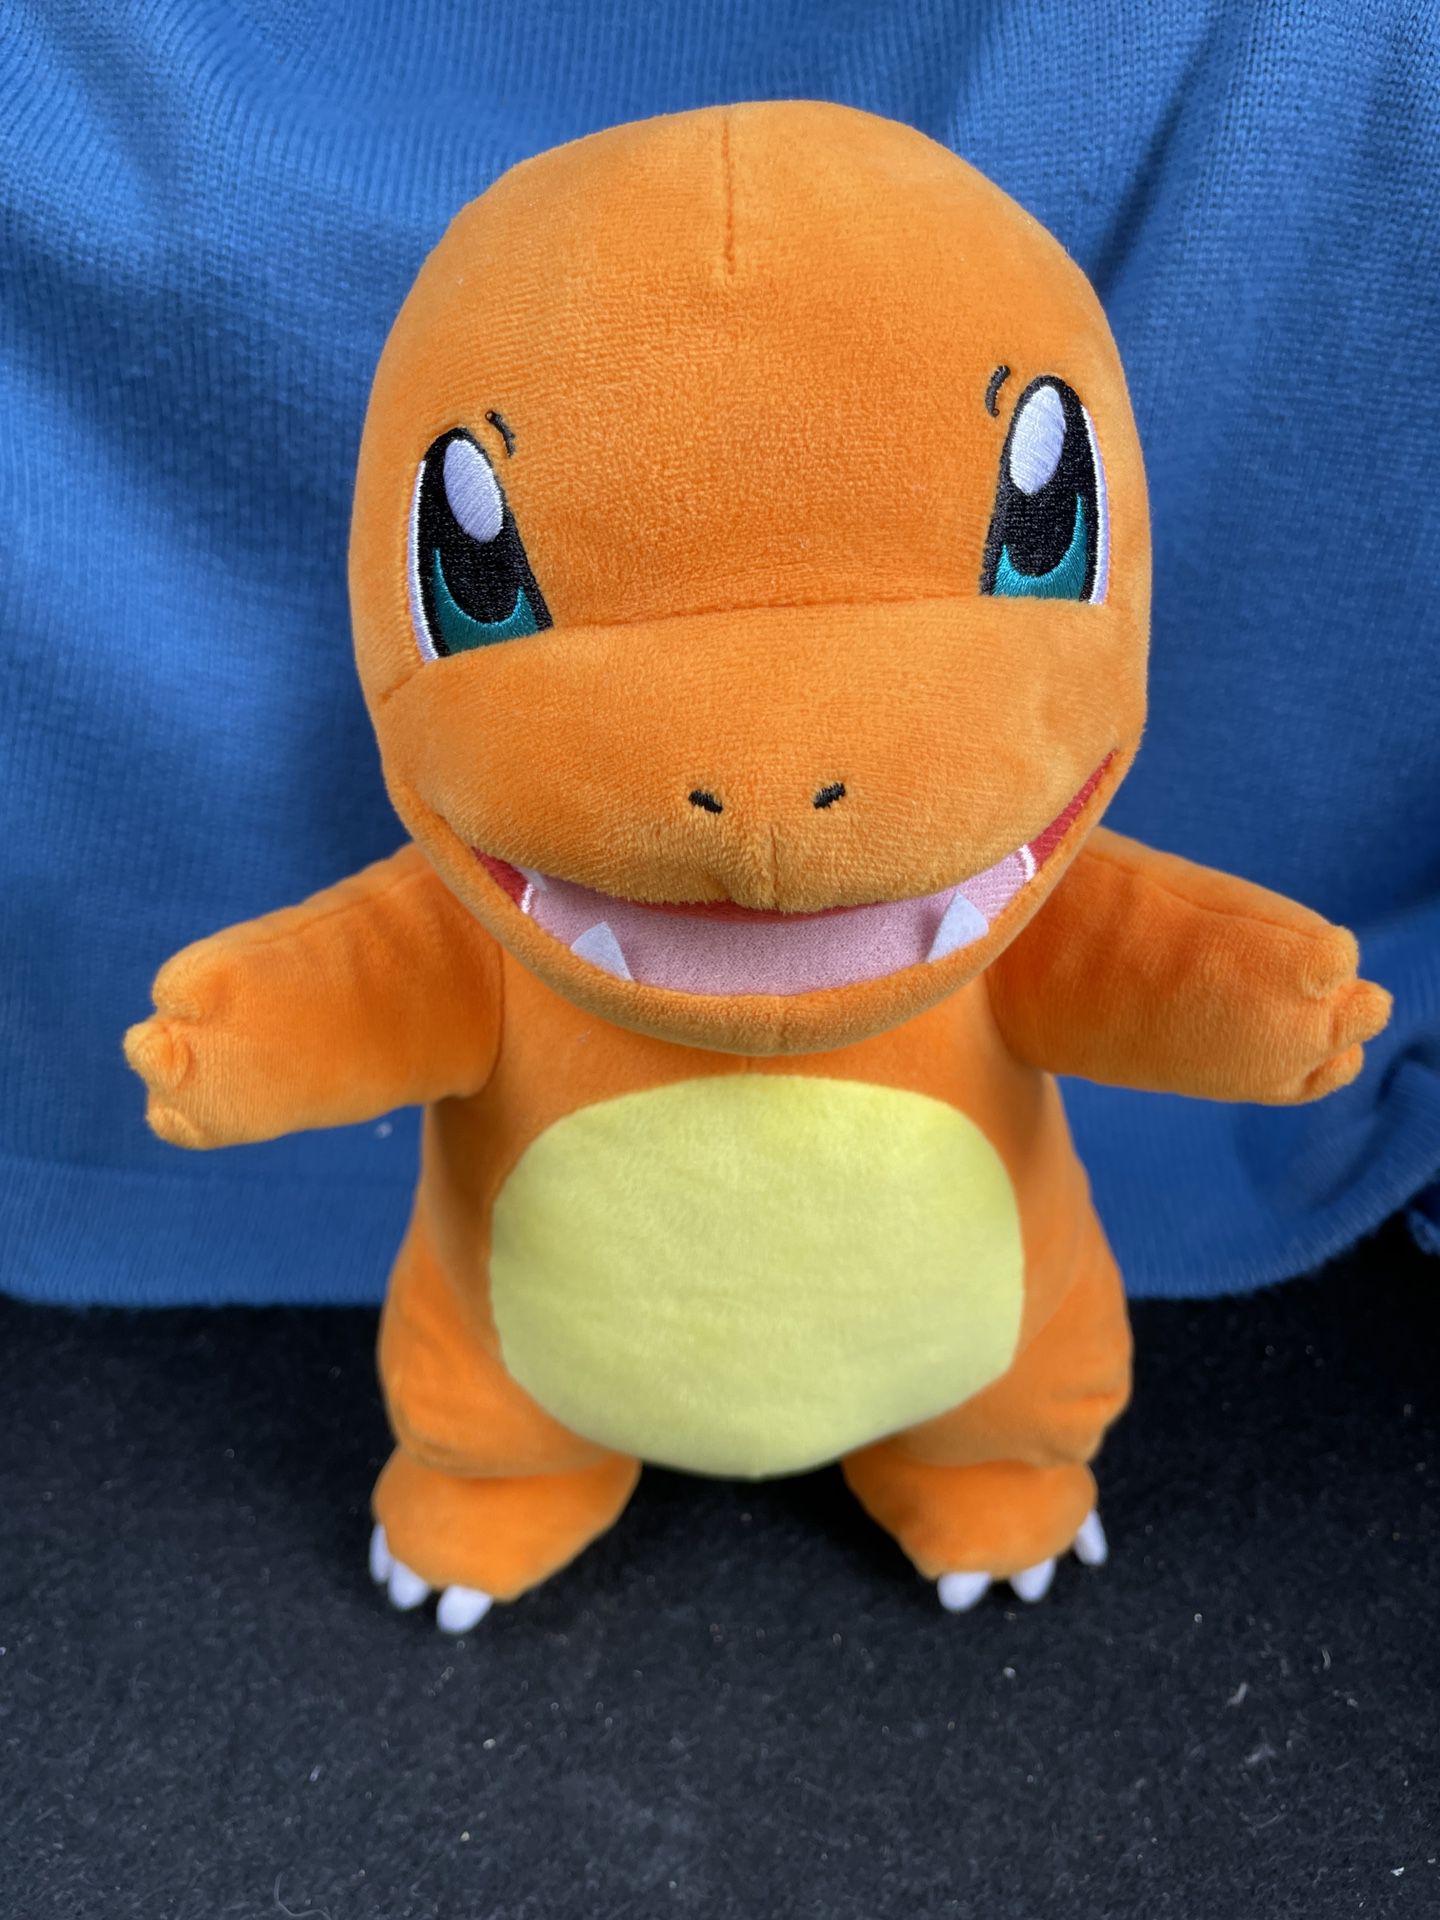 12" Chatty Charmander Plush Pokemon WCT (Talking Toy by Wicked Cool Toys)